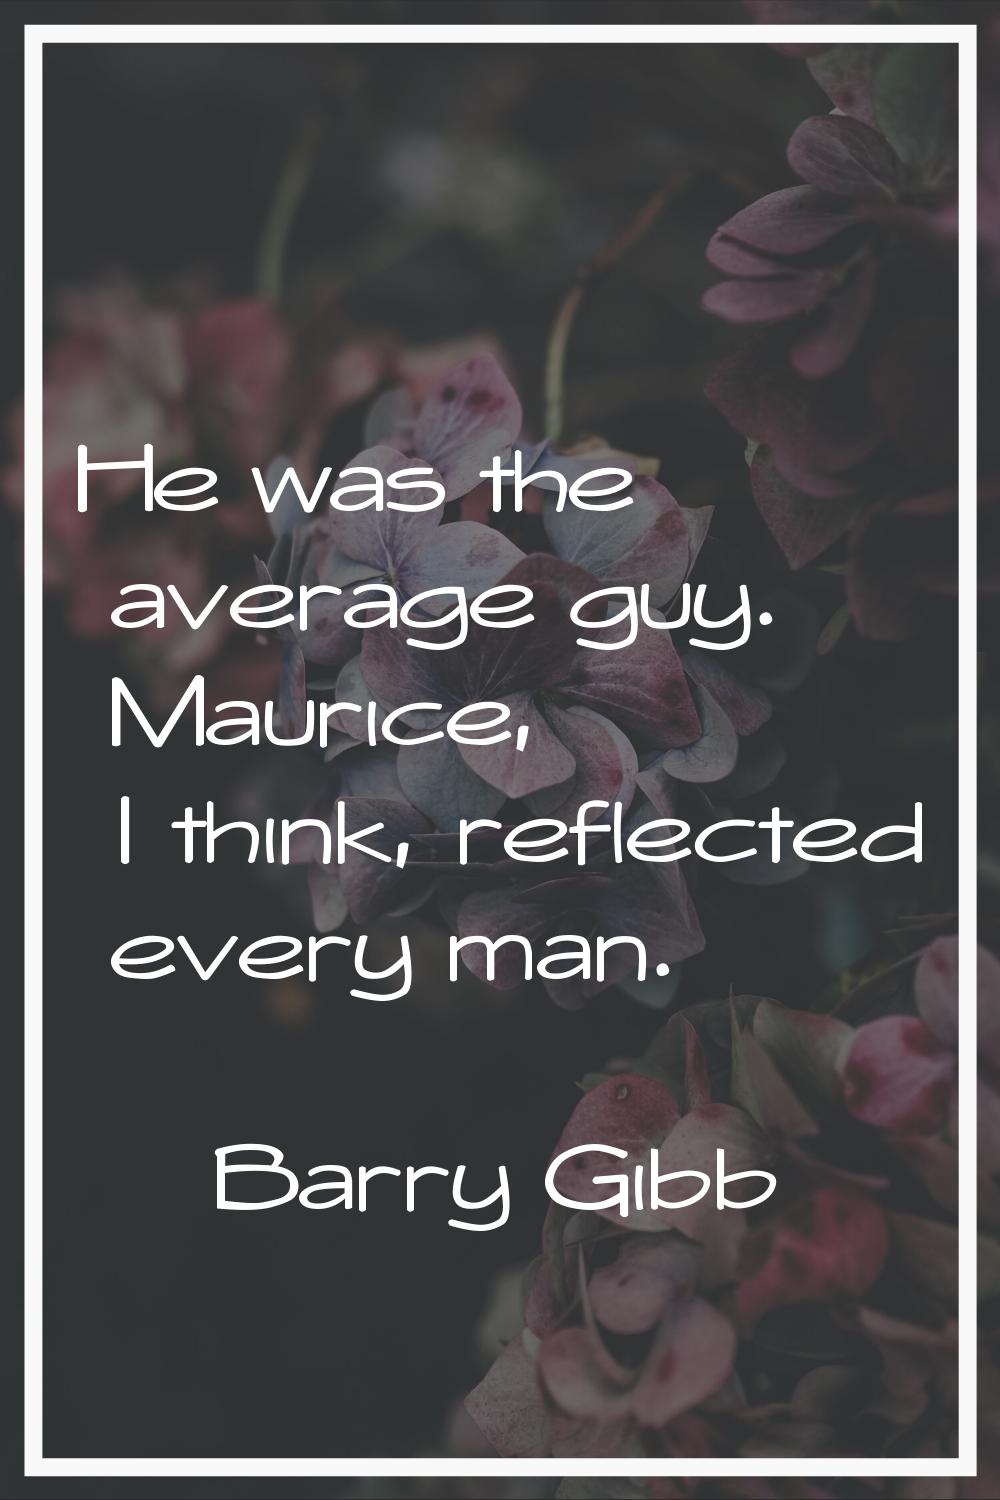 He was the average guy. Maurice, I think, reflected every man.